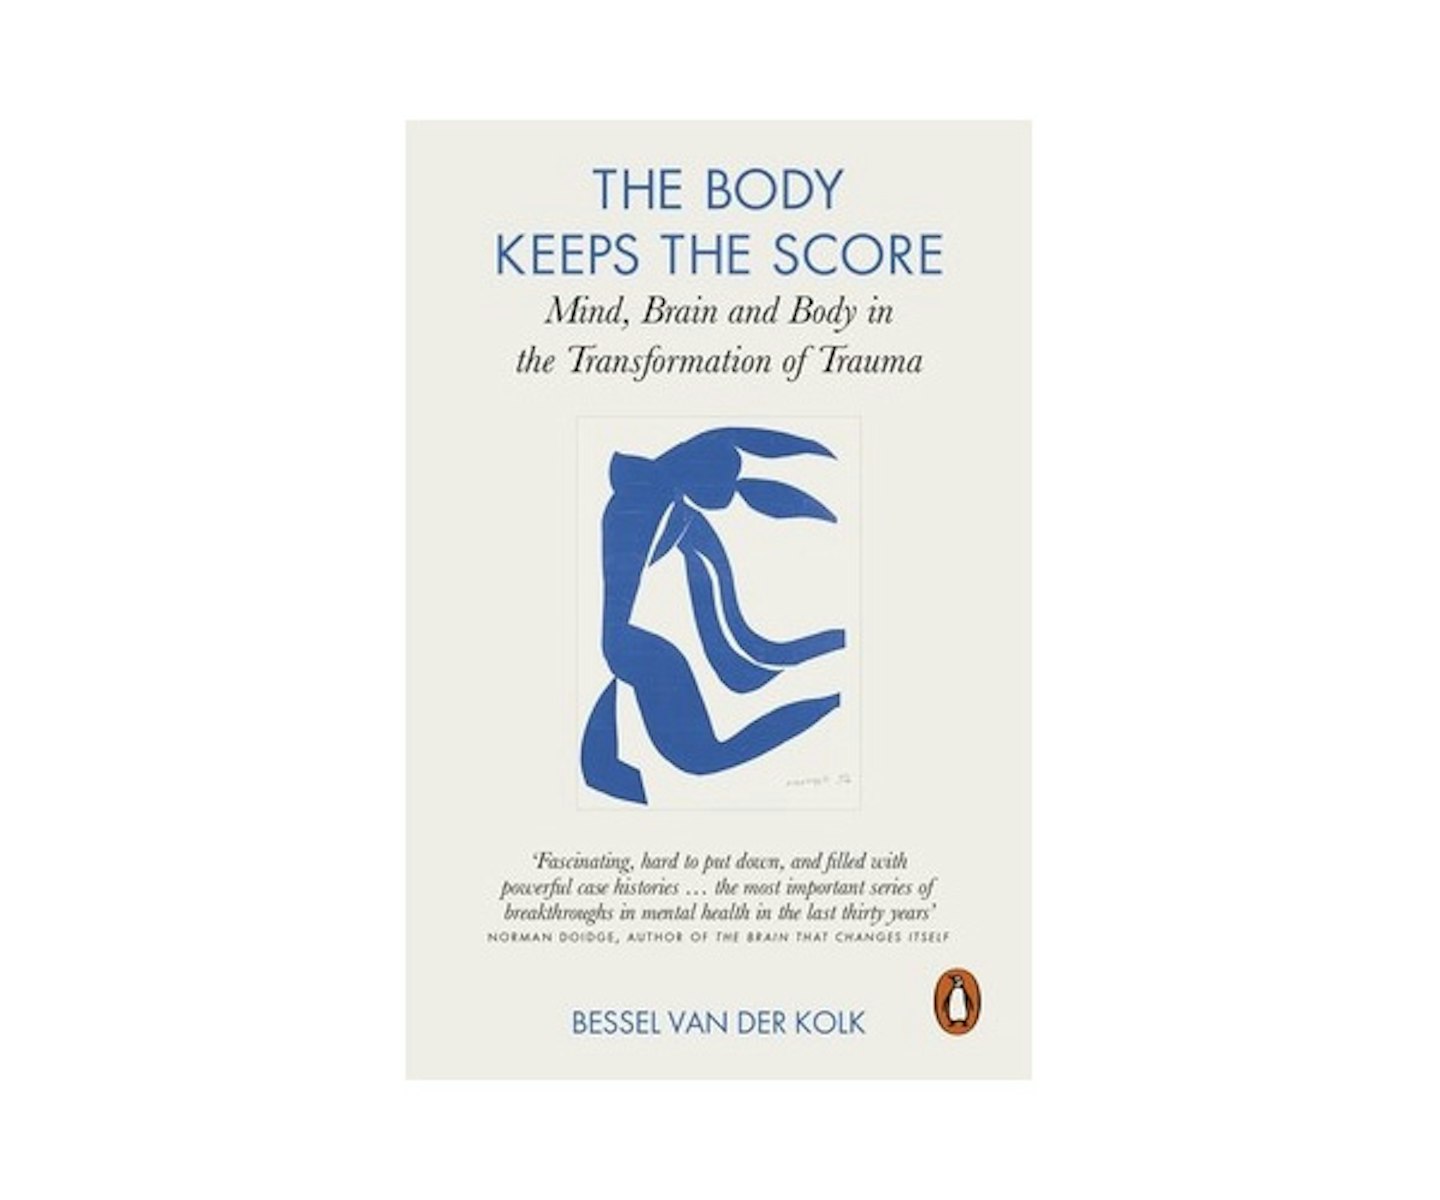  The Body Keeps the Score: Mind, Brain and Body in the Transformation of Trauma 